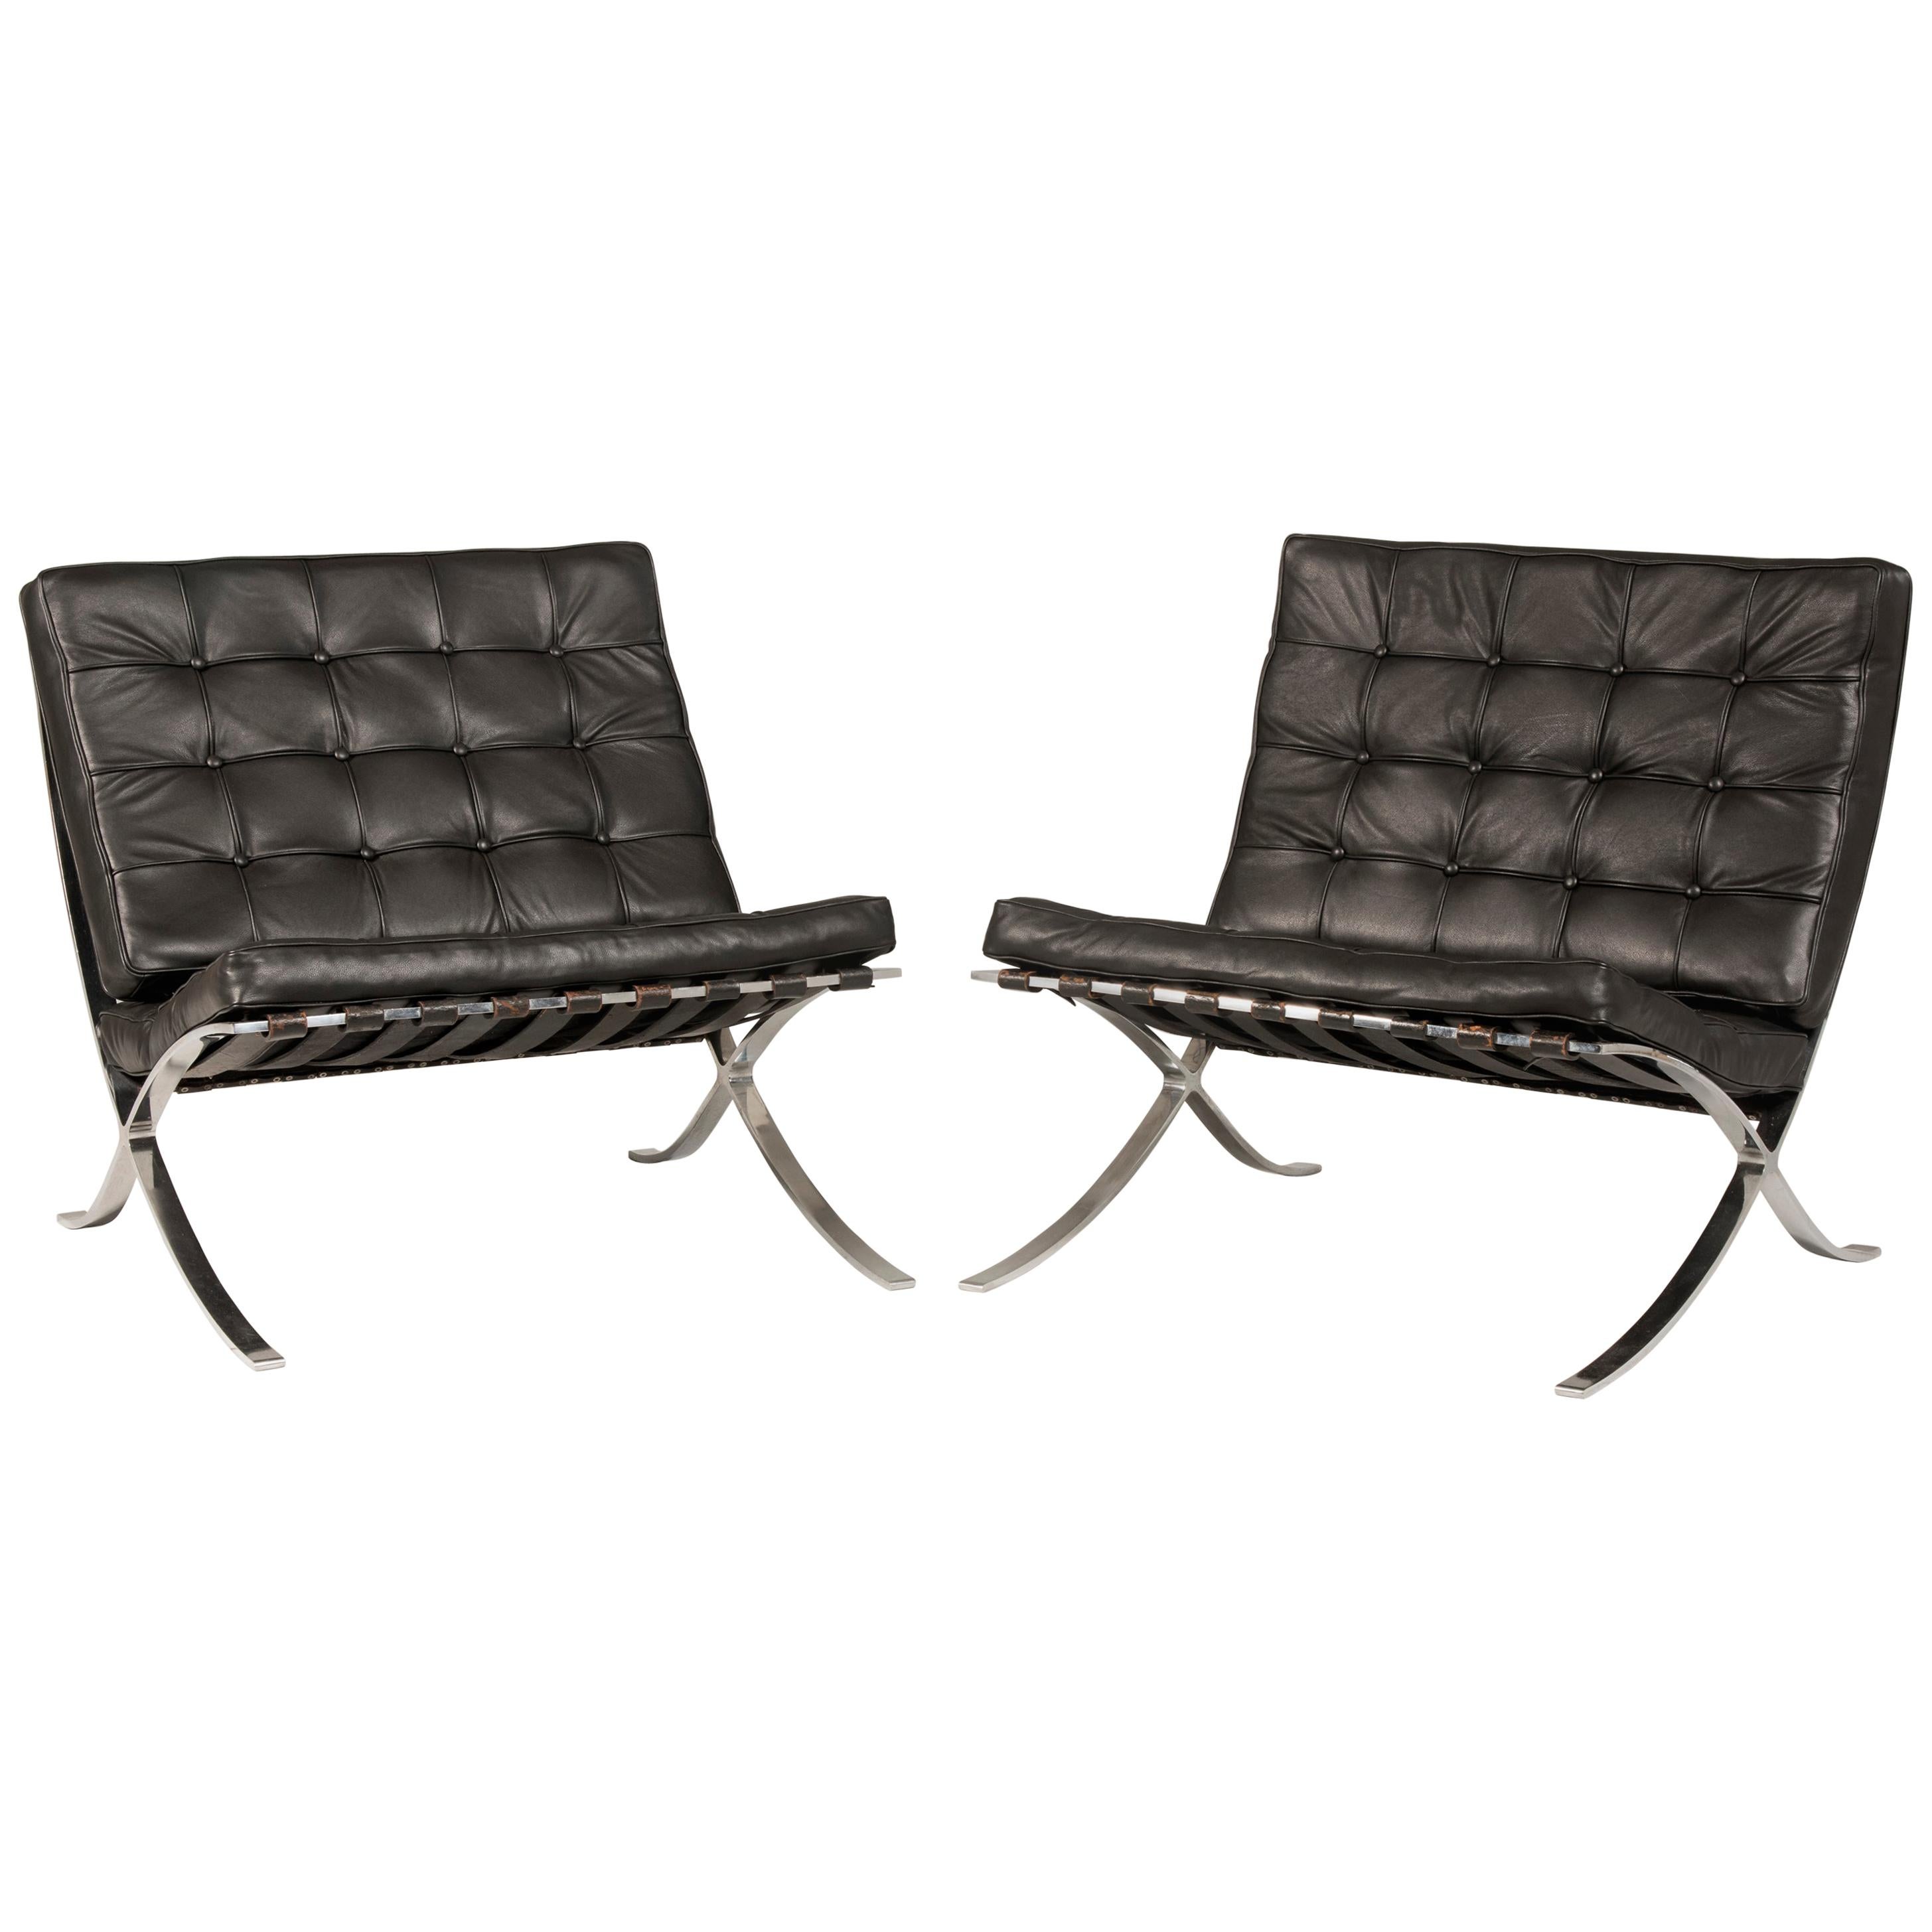 1980s Knoll Barcelona Chairs Black Leather Set of 2 